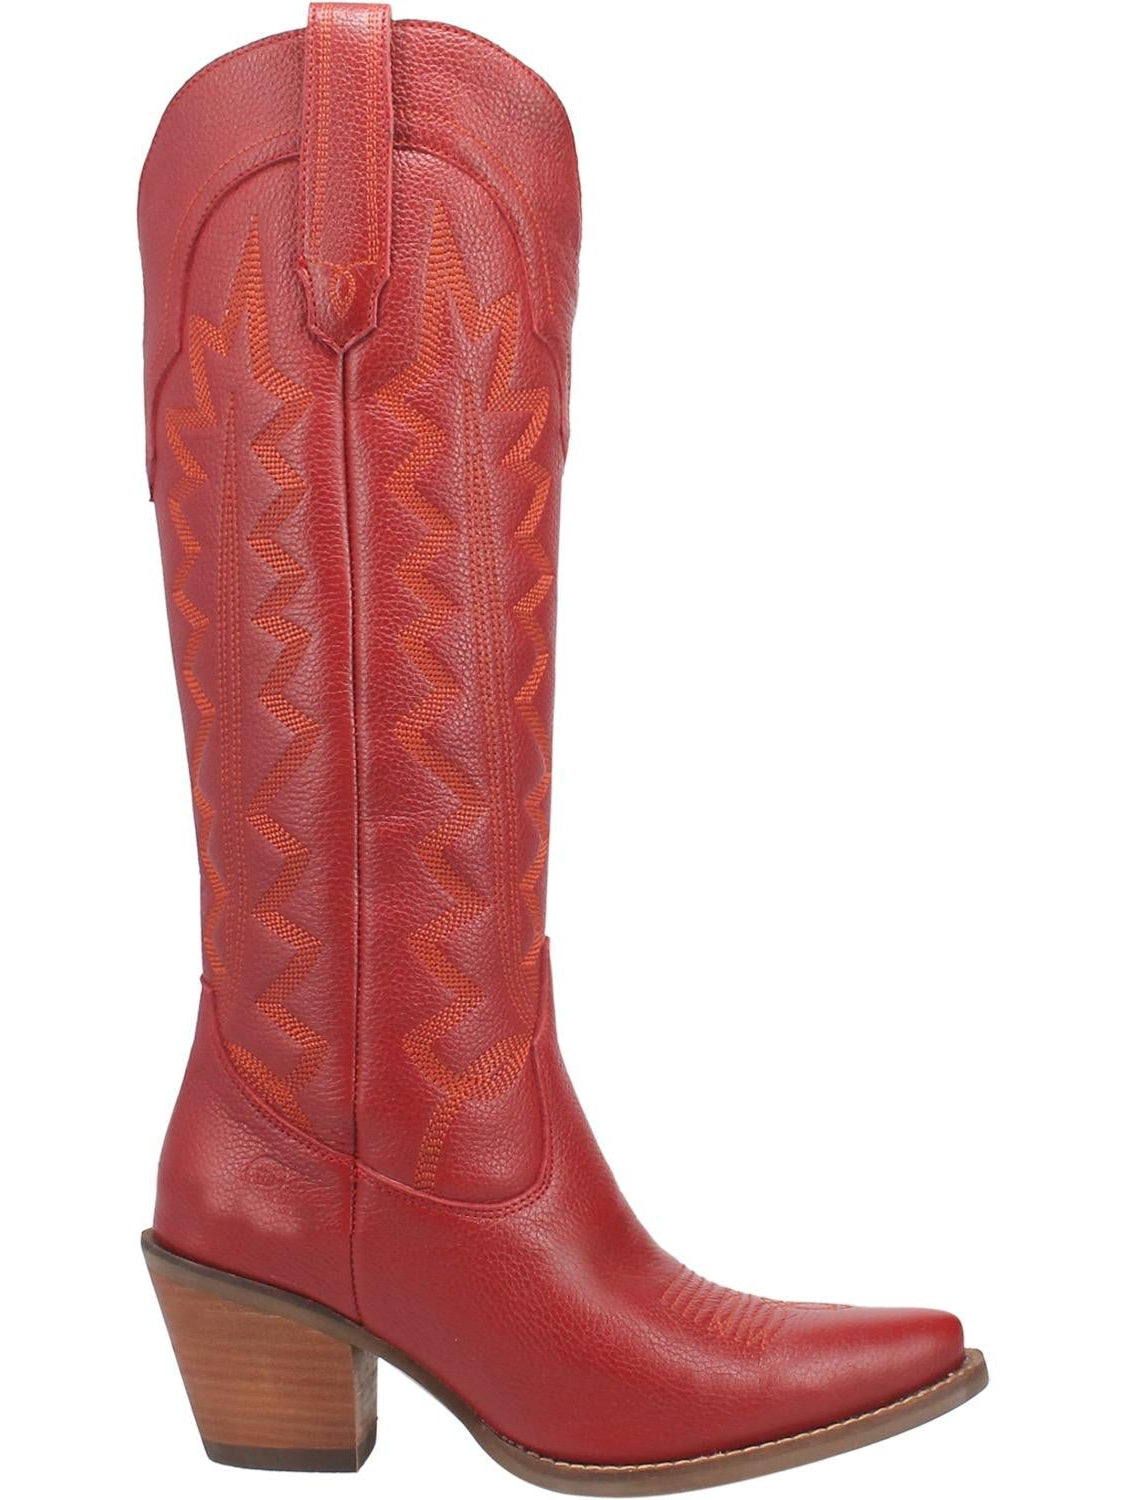 High Cotton Boot by Dingo from Dan Post - Red